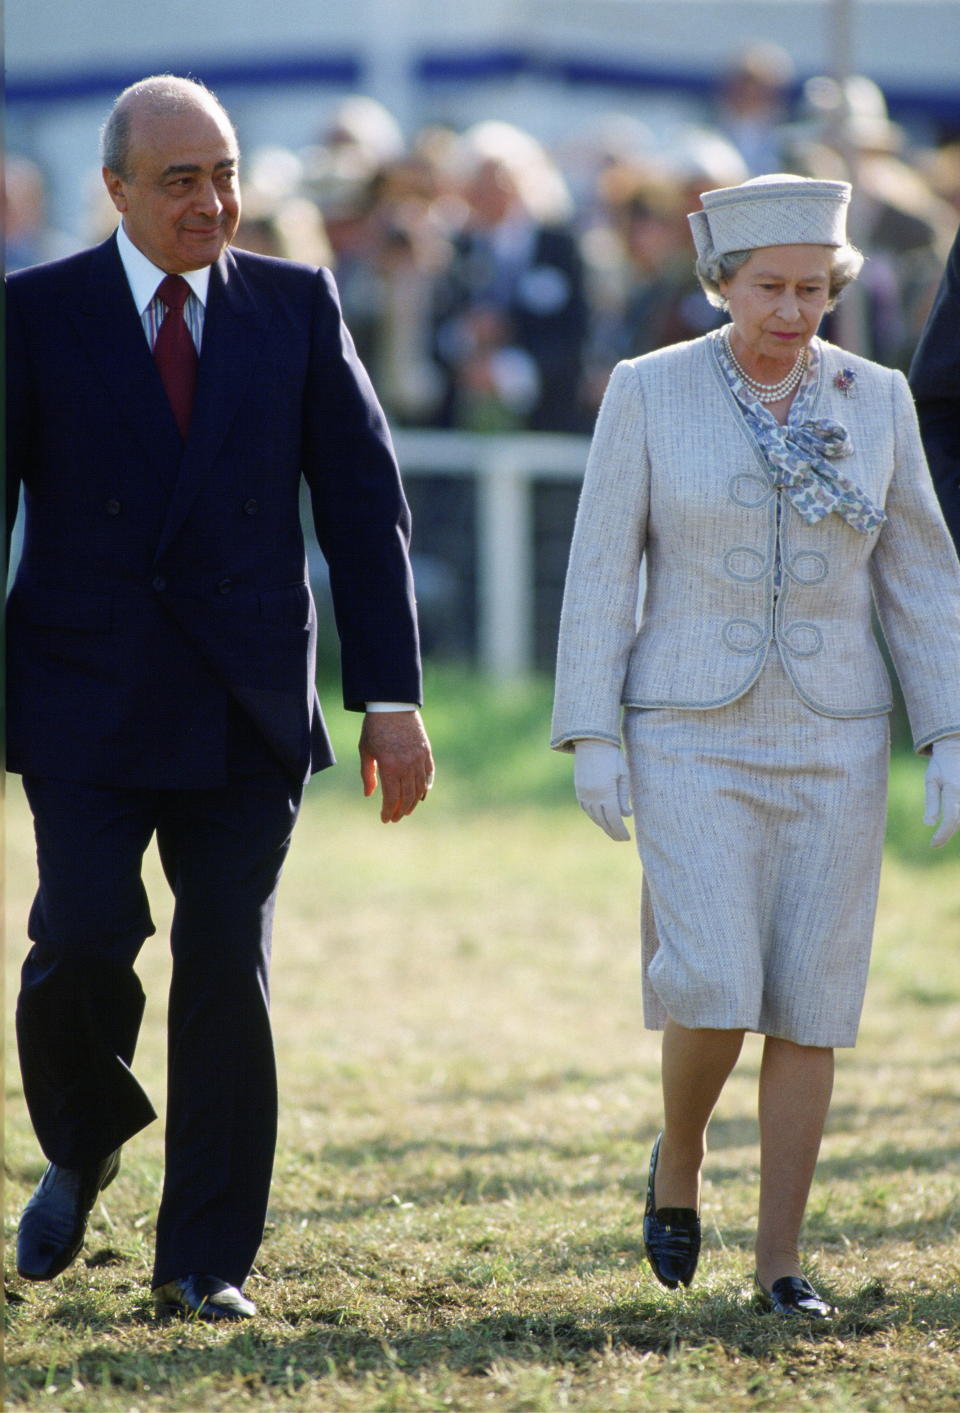 WINDSOR, UNITED KINGDOM - MAY 17:  Queen Elizabeth II At The Windsor Horse Show With One Of The Show's Sponsors Mohammed Al-fayed Of The Harrods Shop. Mr Al-fayed Is The Father Of  Dodi Al-fayed. The Queen Is Wearing A Pale Grey Suit By Fashion Designer John Anderson.  (Photo by Tim Graham Photo Library via Getty Images)